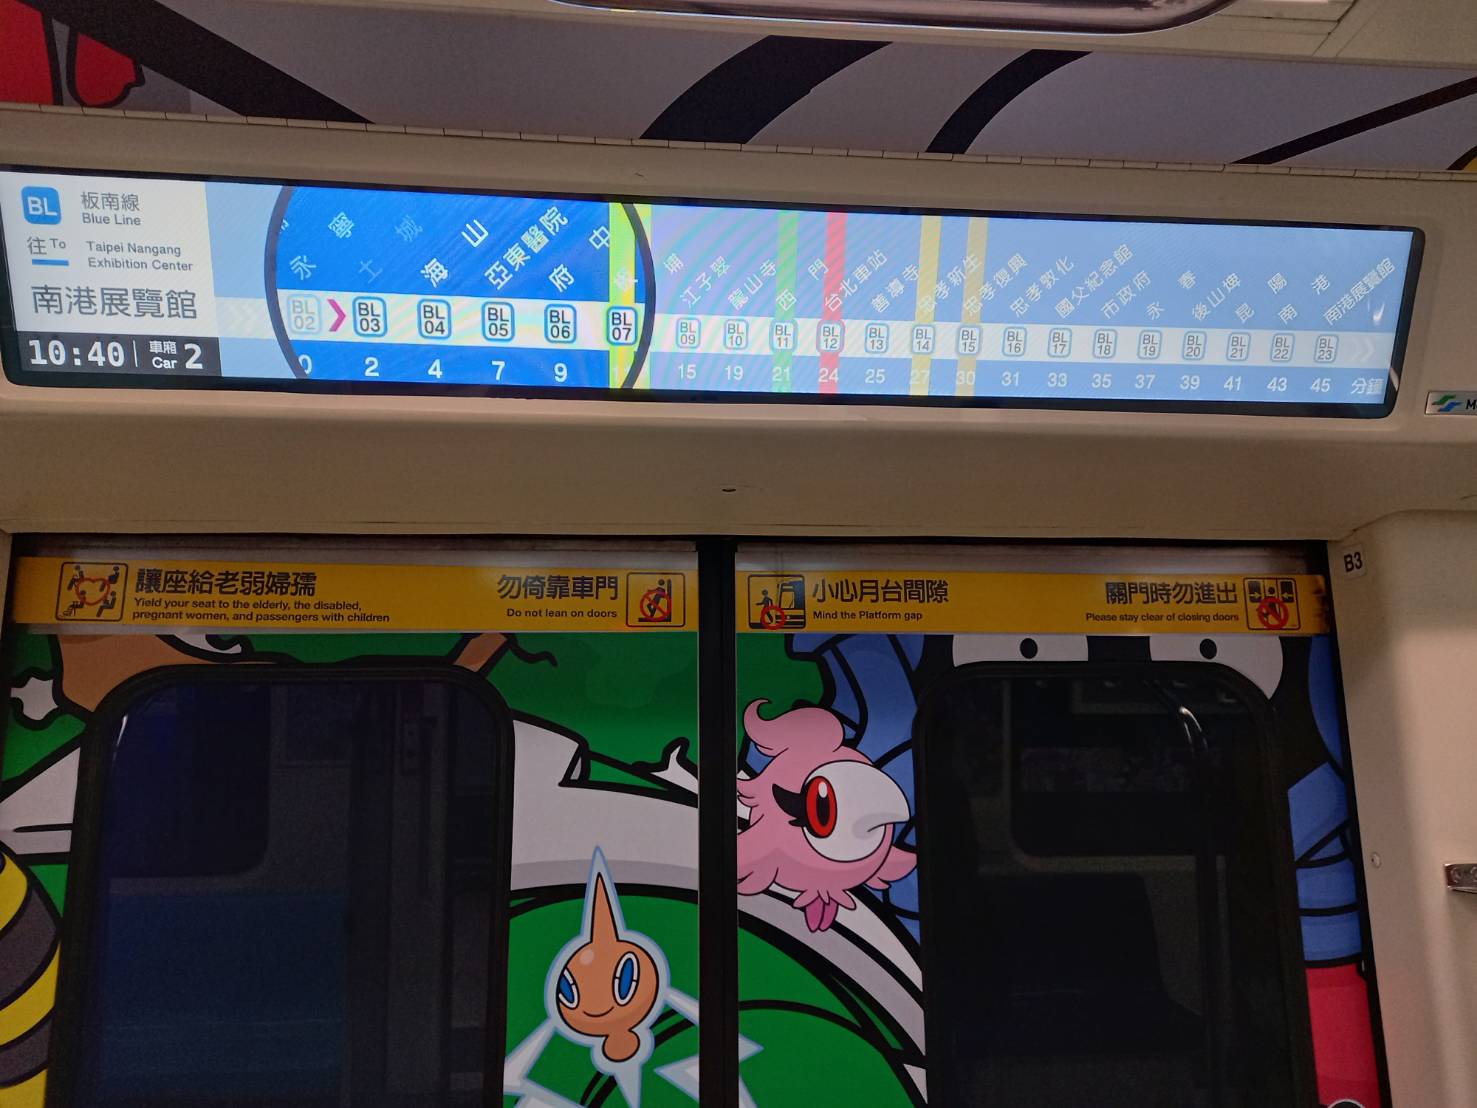 Detailed information on upcoming stations via the new overhead display on “Smart Display Metro Train”.